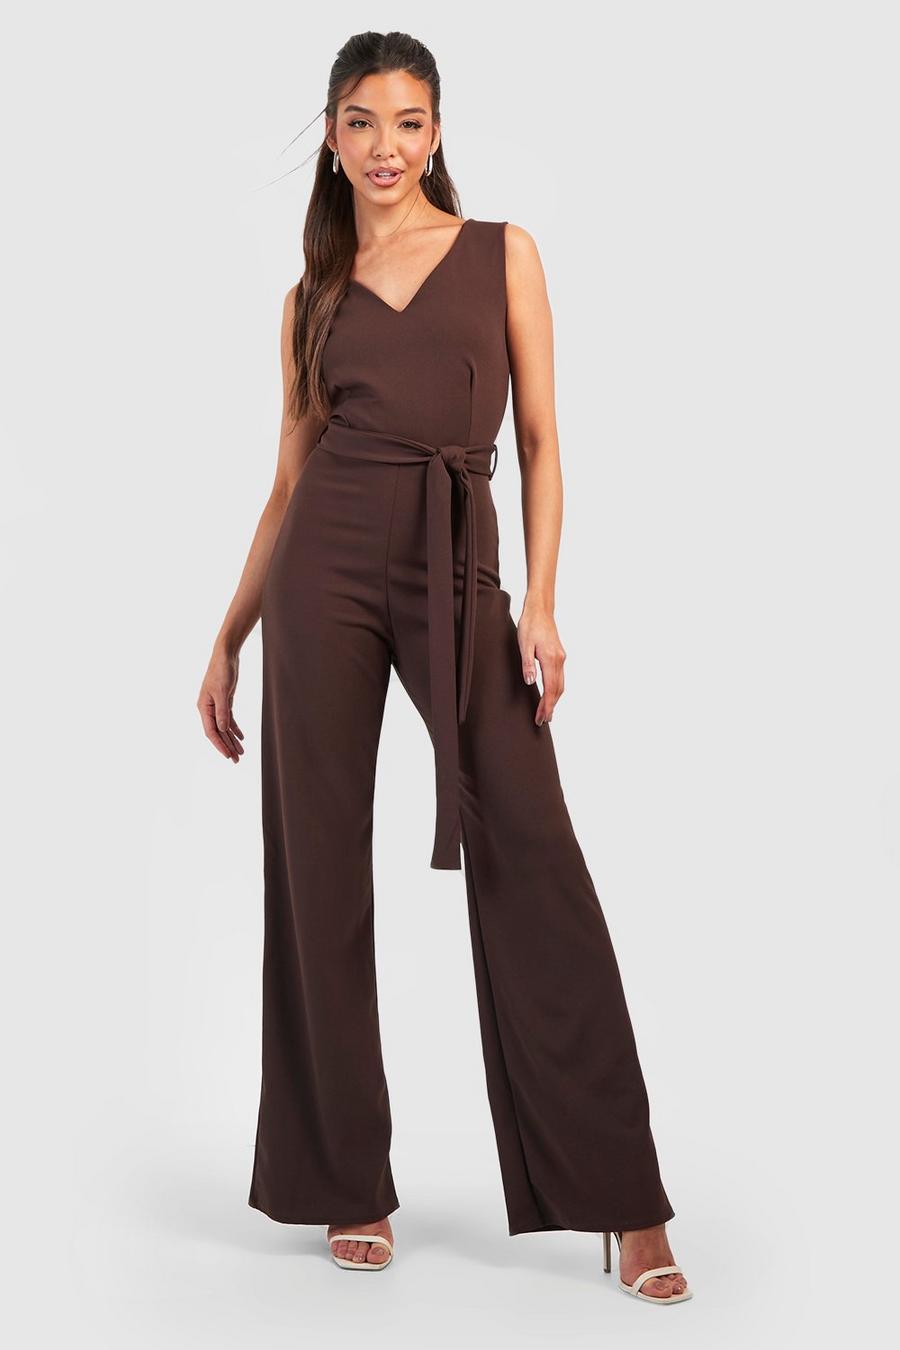 Chocolate Crepe Self Fabric Belted Wide Leg Jumpsuit